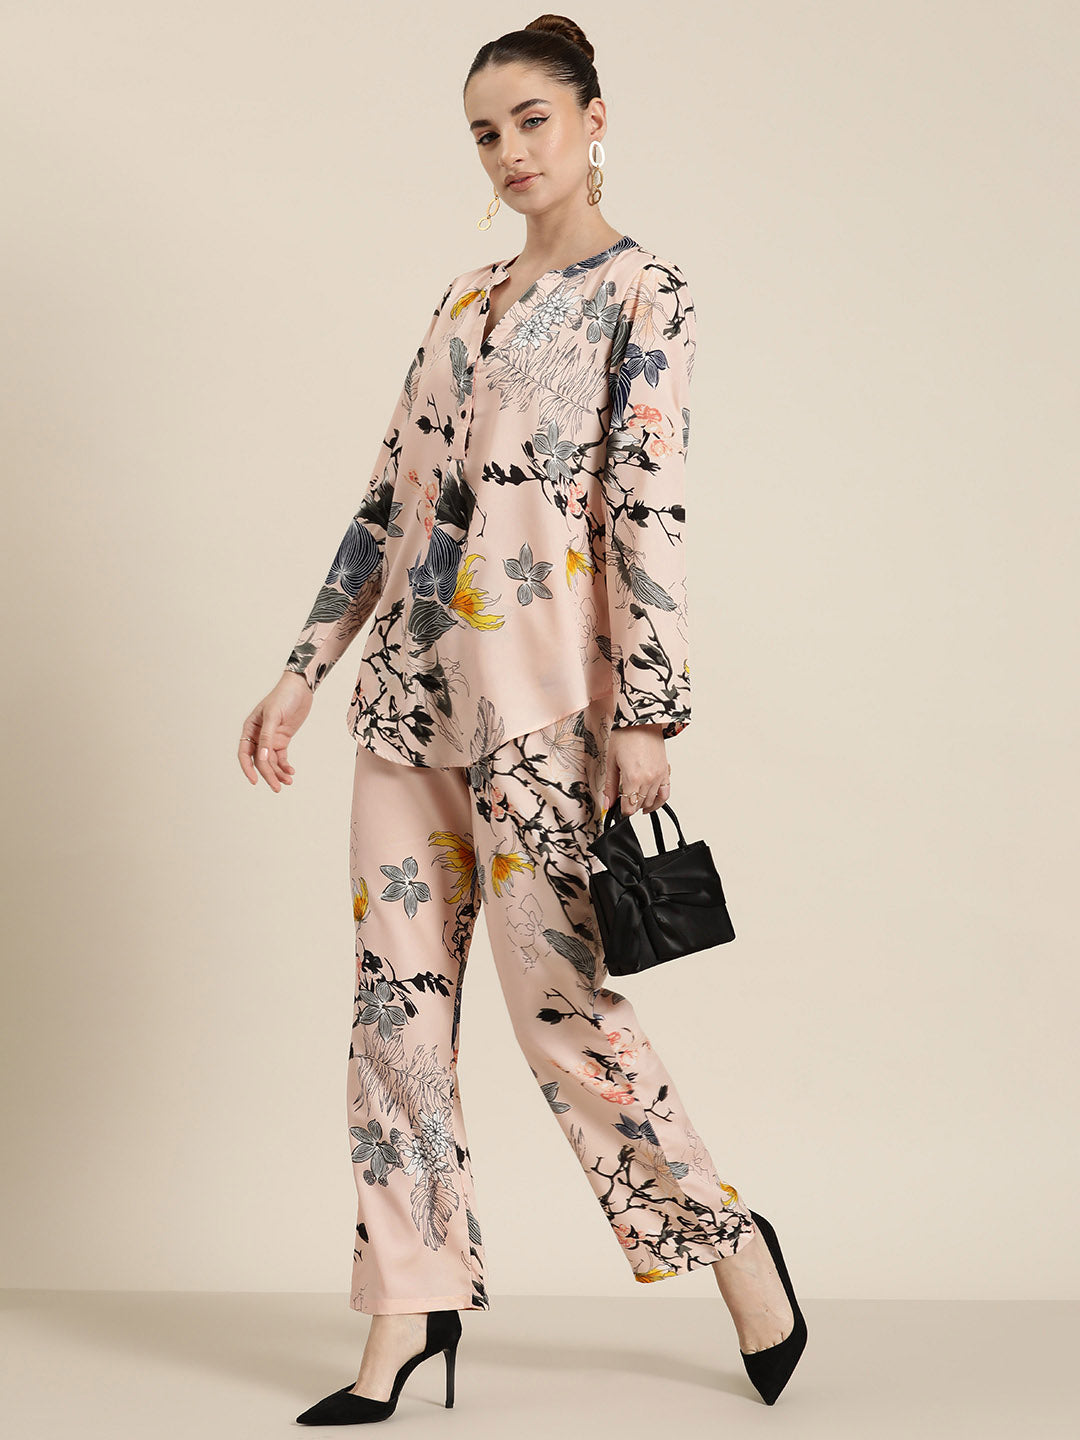 Peach floral half placket shirt and pant co-ord set.